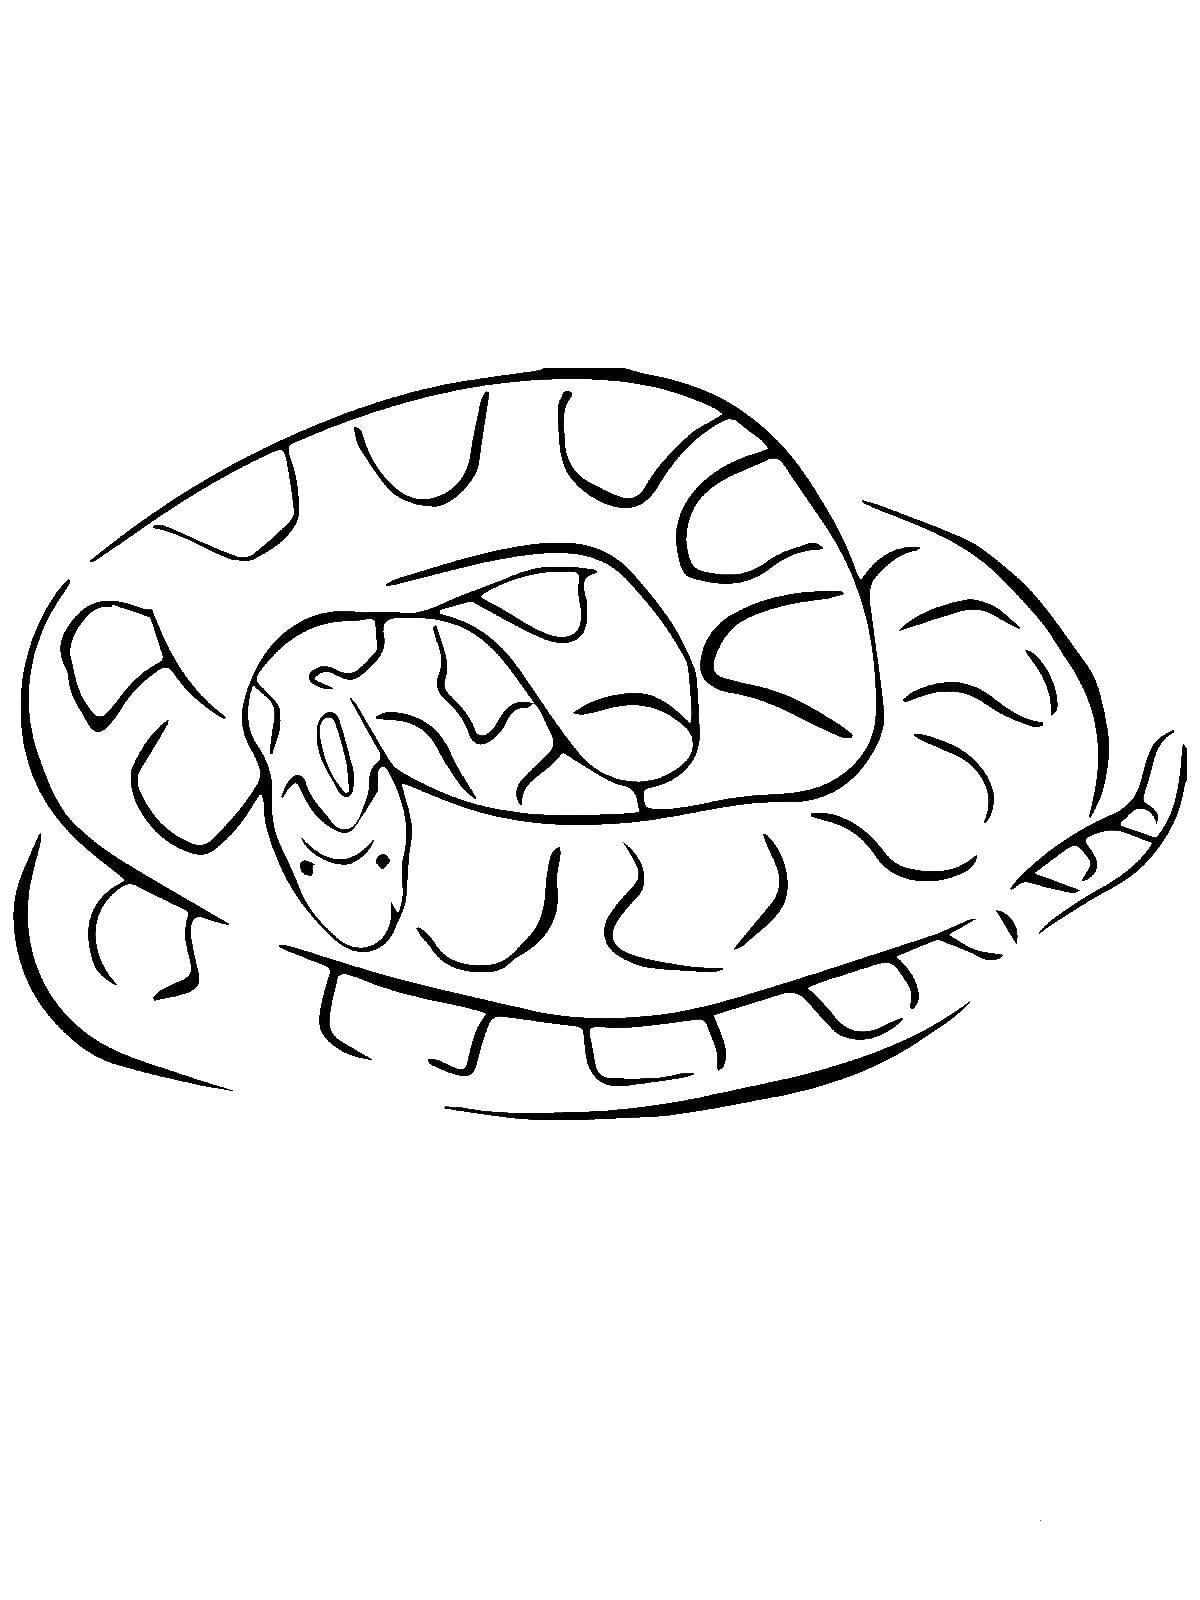 Coloring The snake curled into a ball. Category wild animals. Tags:  Reptile, snake.